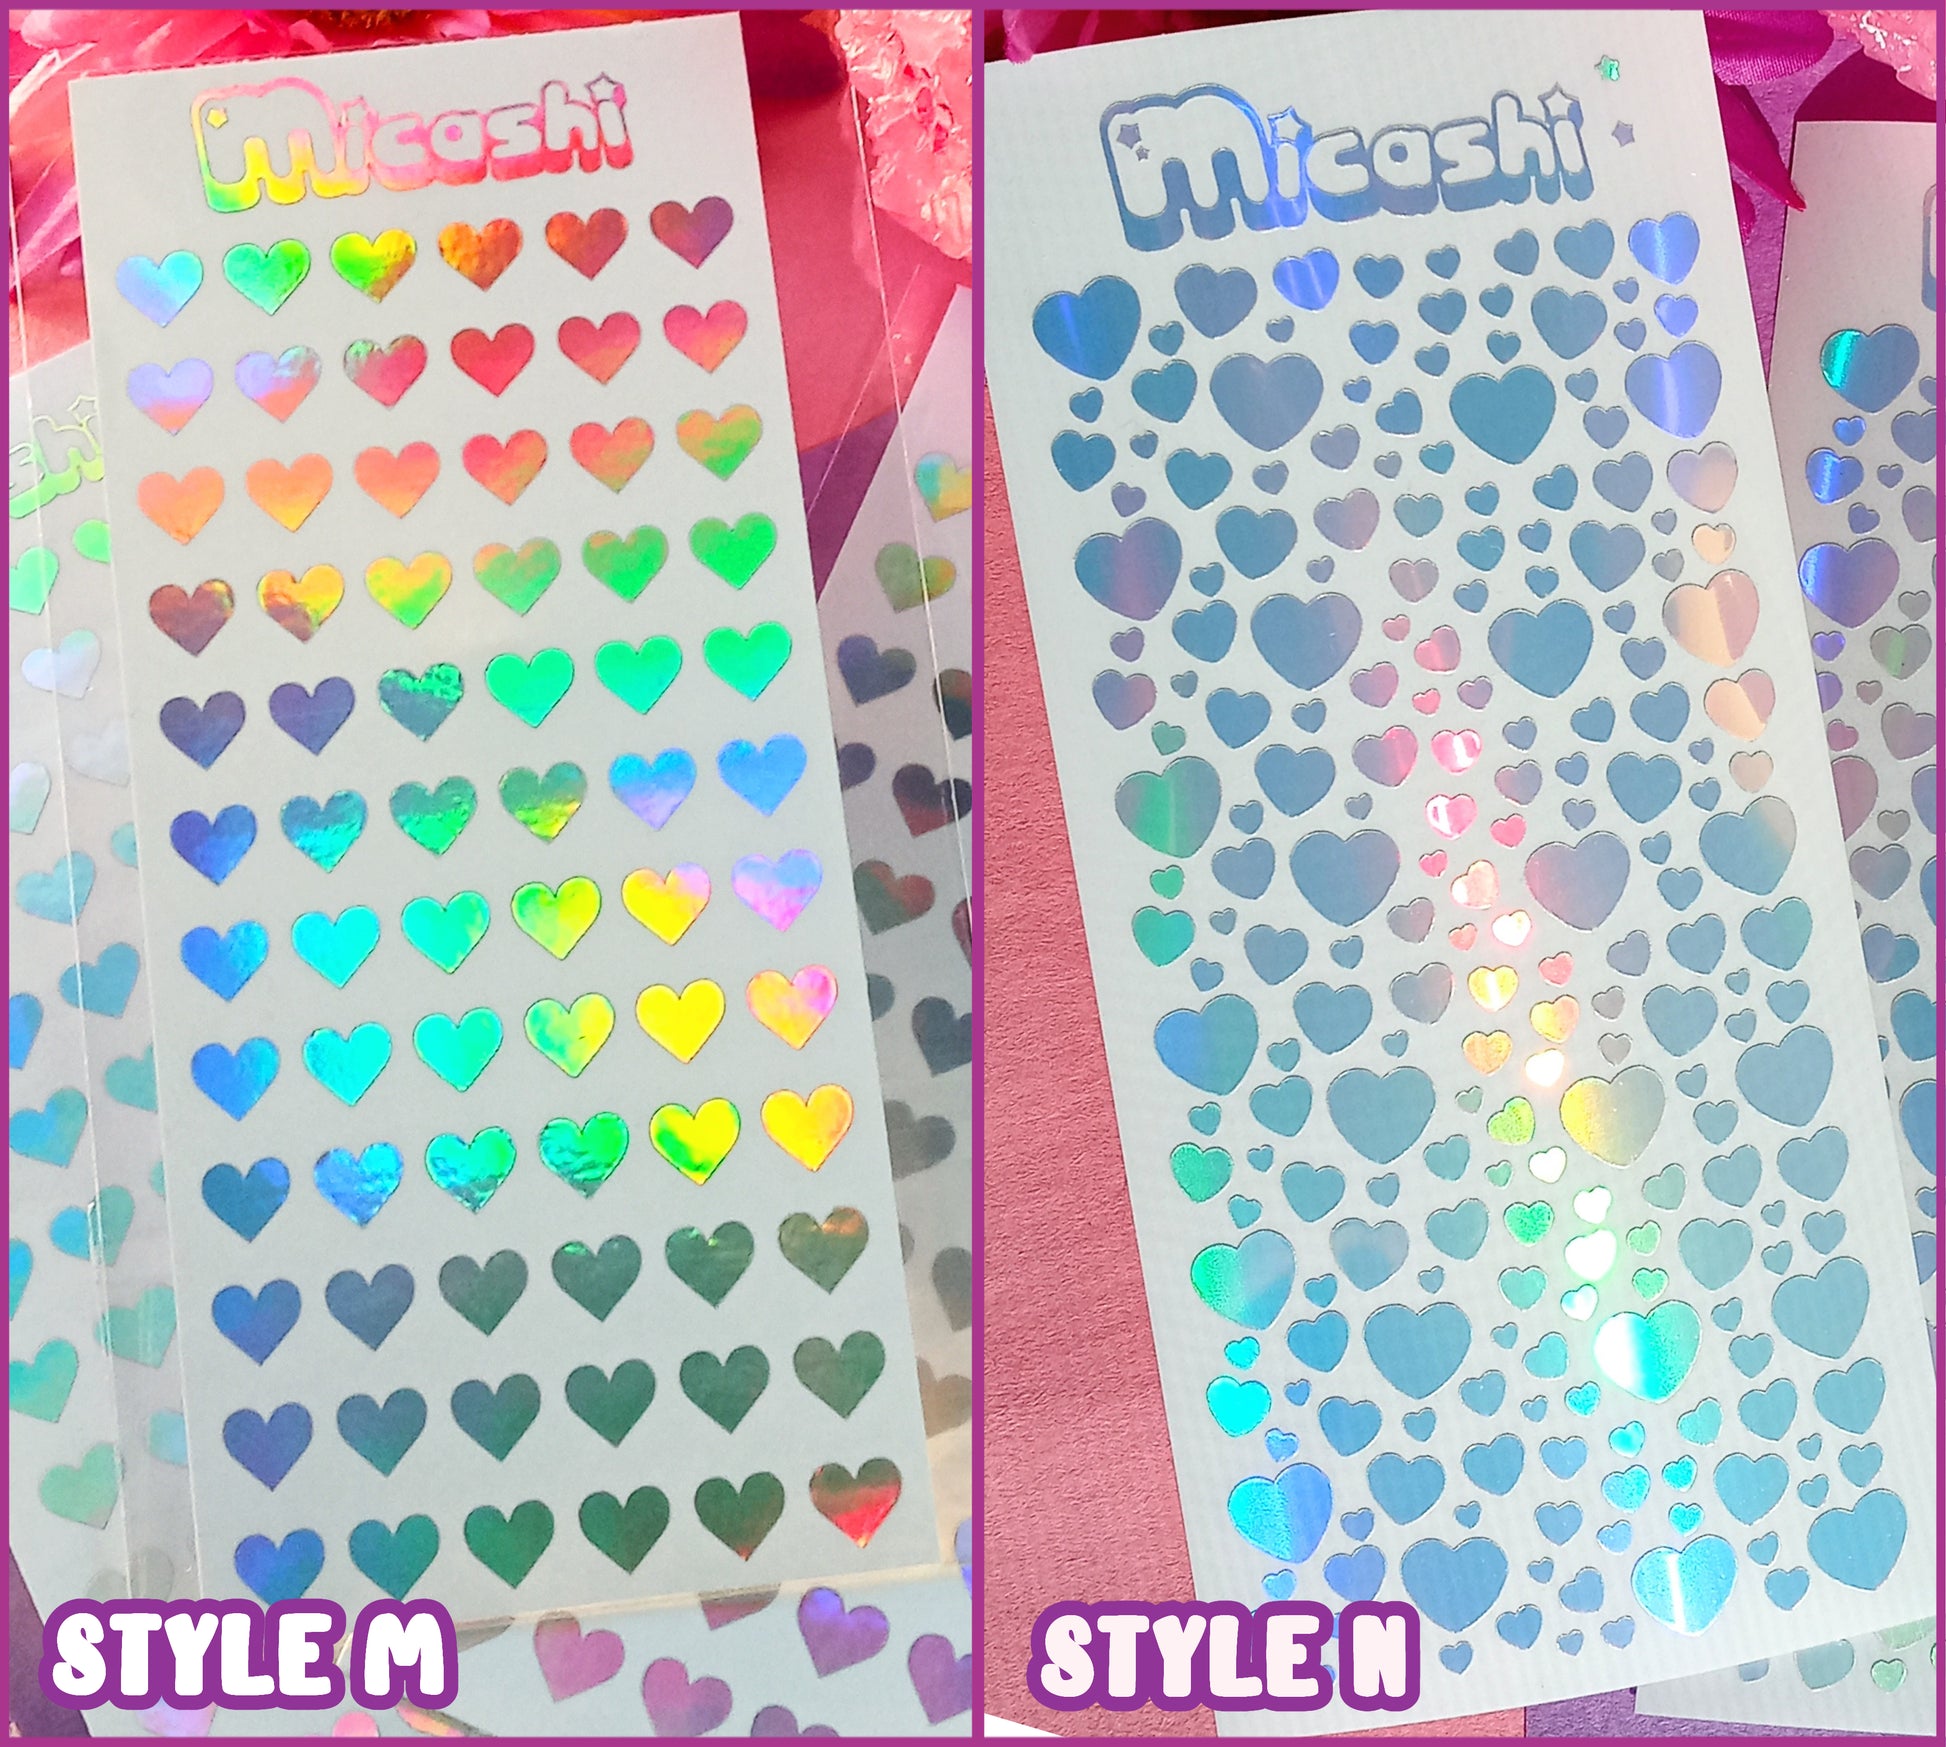 Holographic Heart Stickers (6 Sheets)